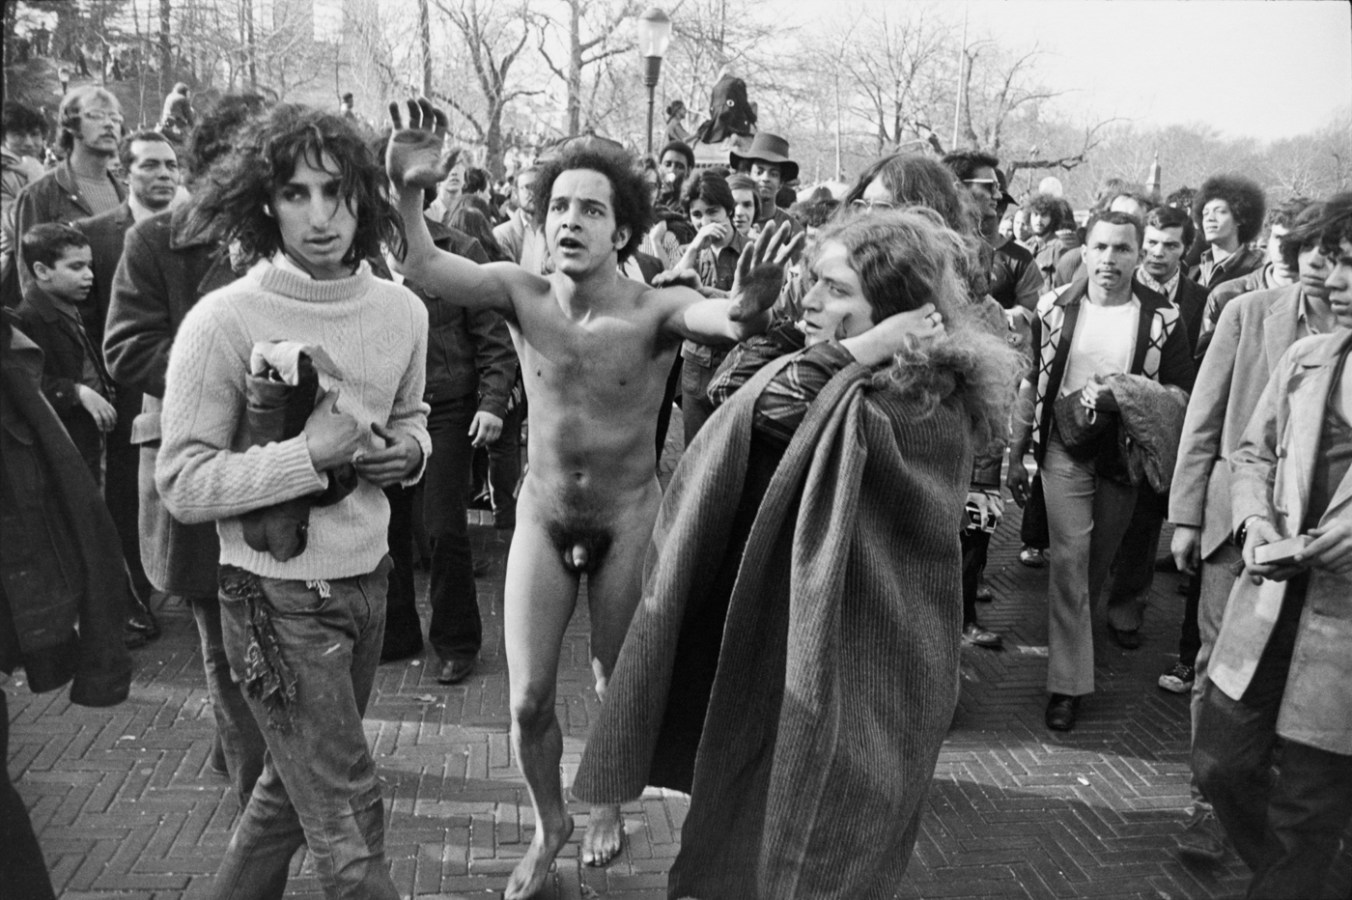 Black-and-white photograph of a naked man with raised arms in a crowded park